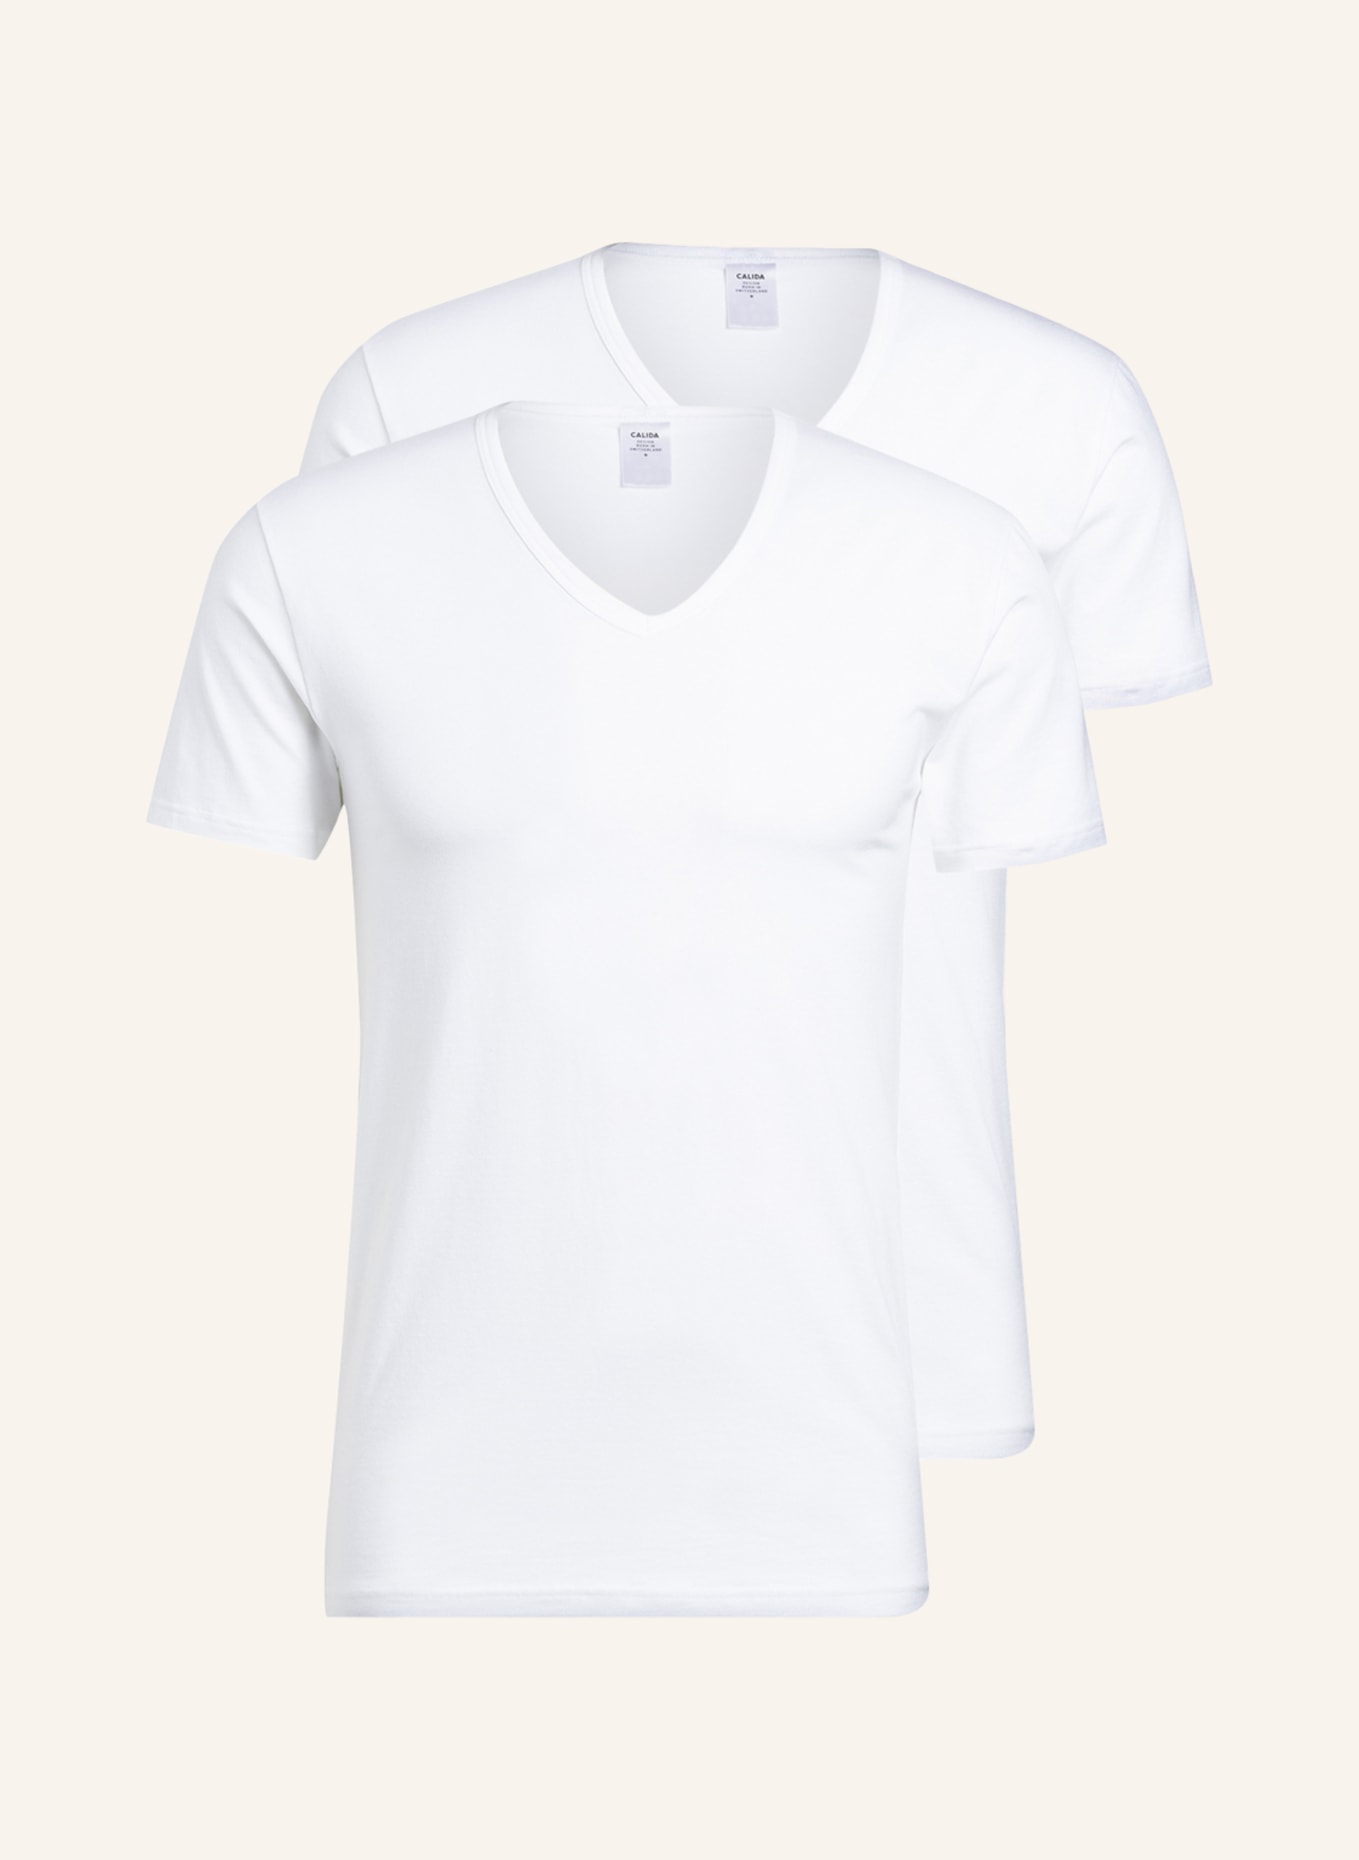 NATURAL BENEFIT CALIDA 2er-Pack weiss V-Shirts in